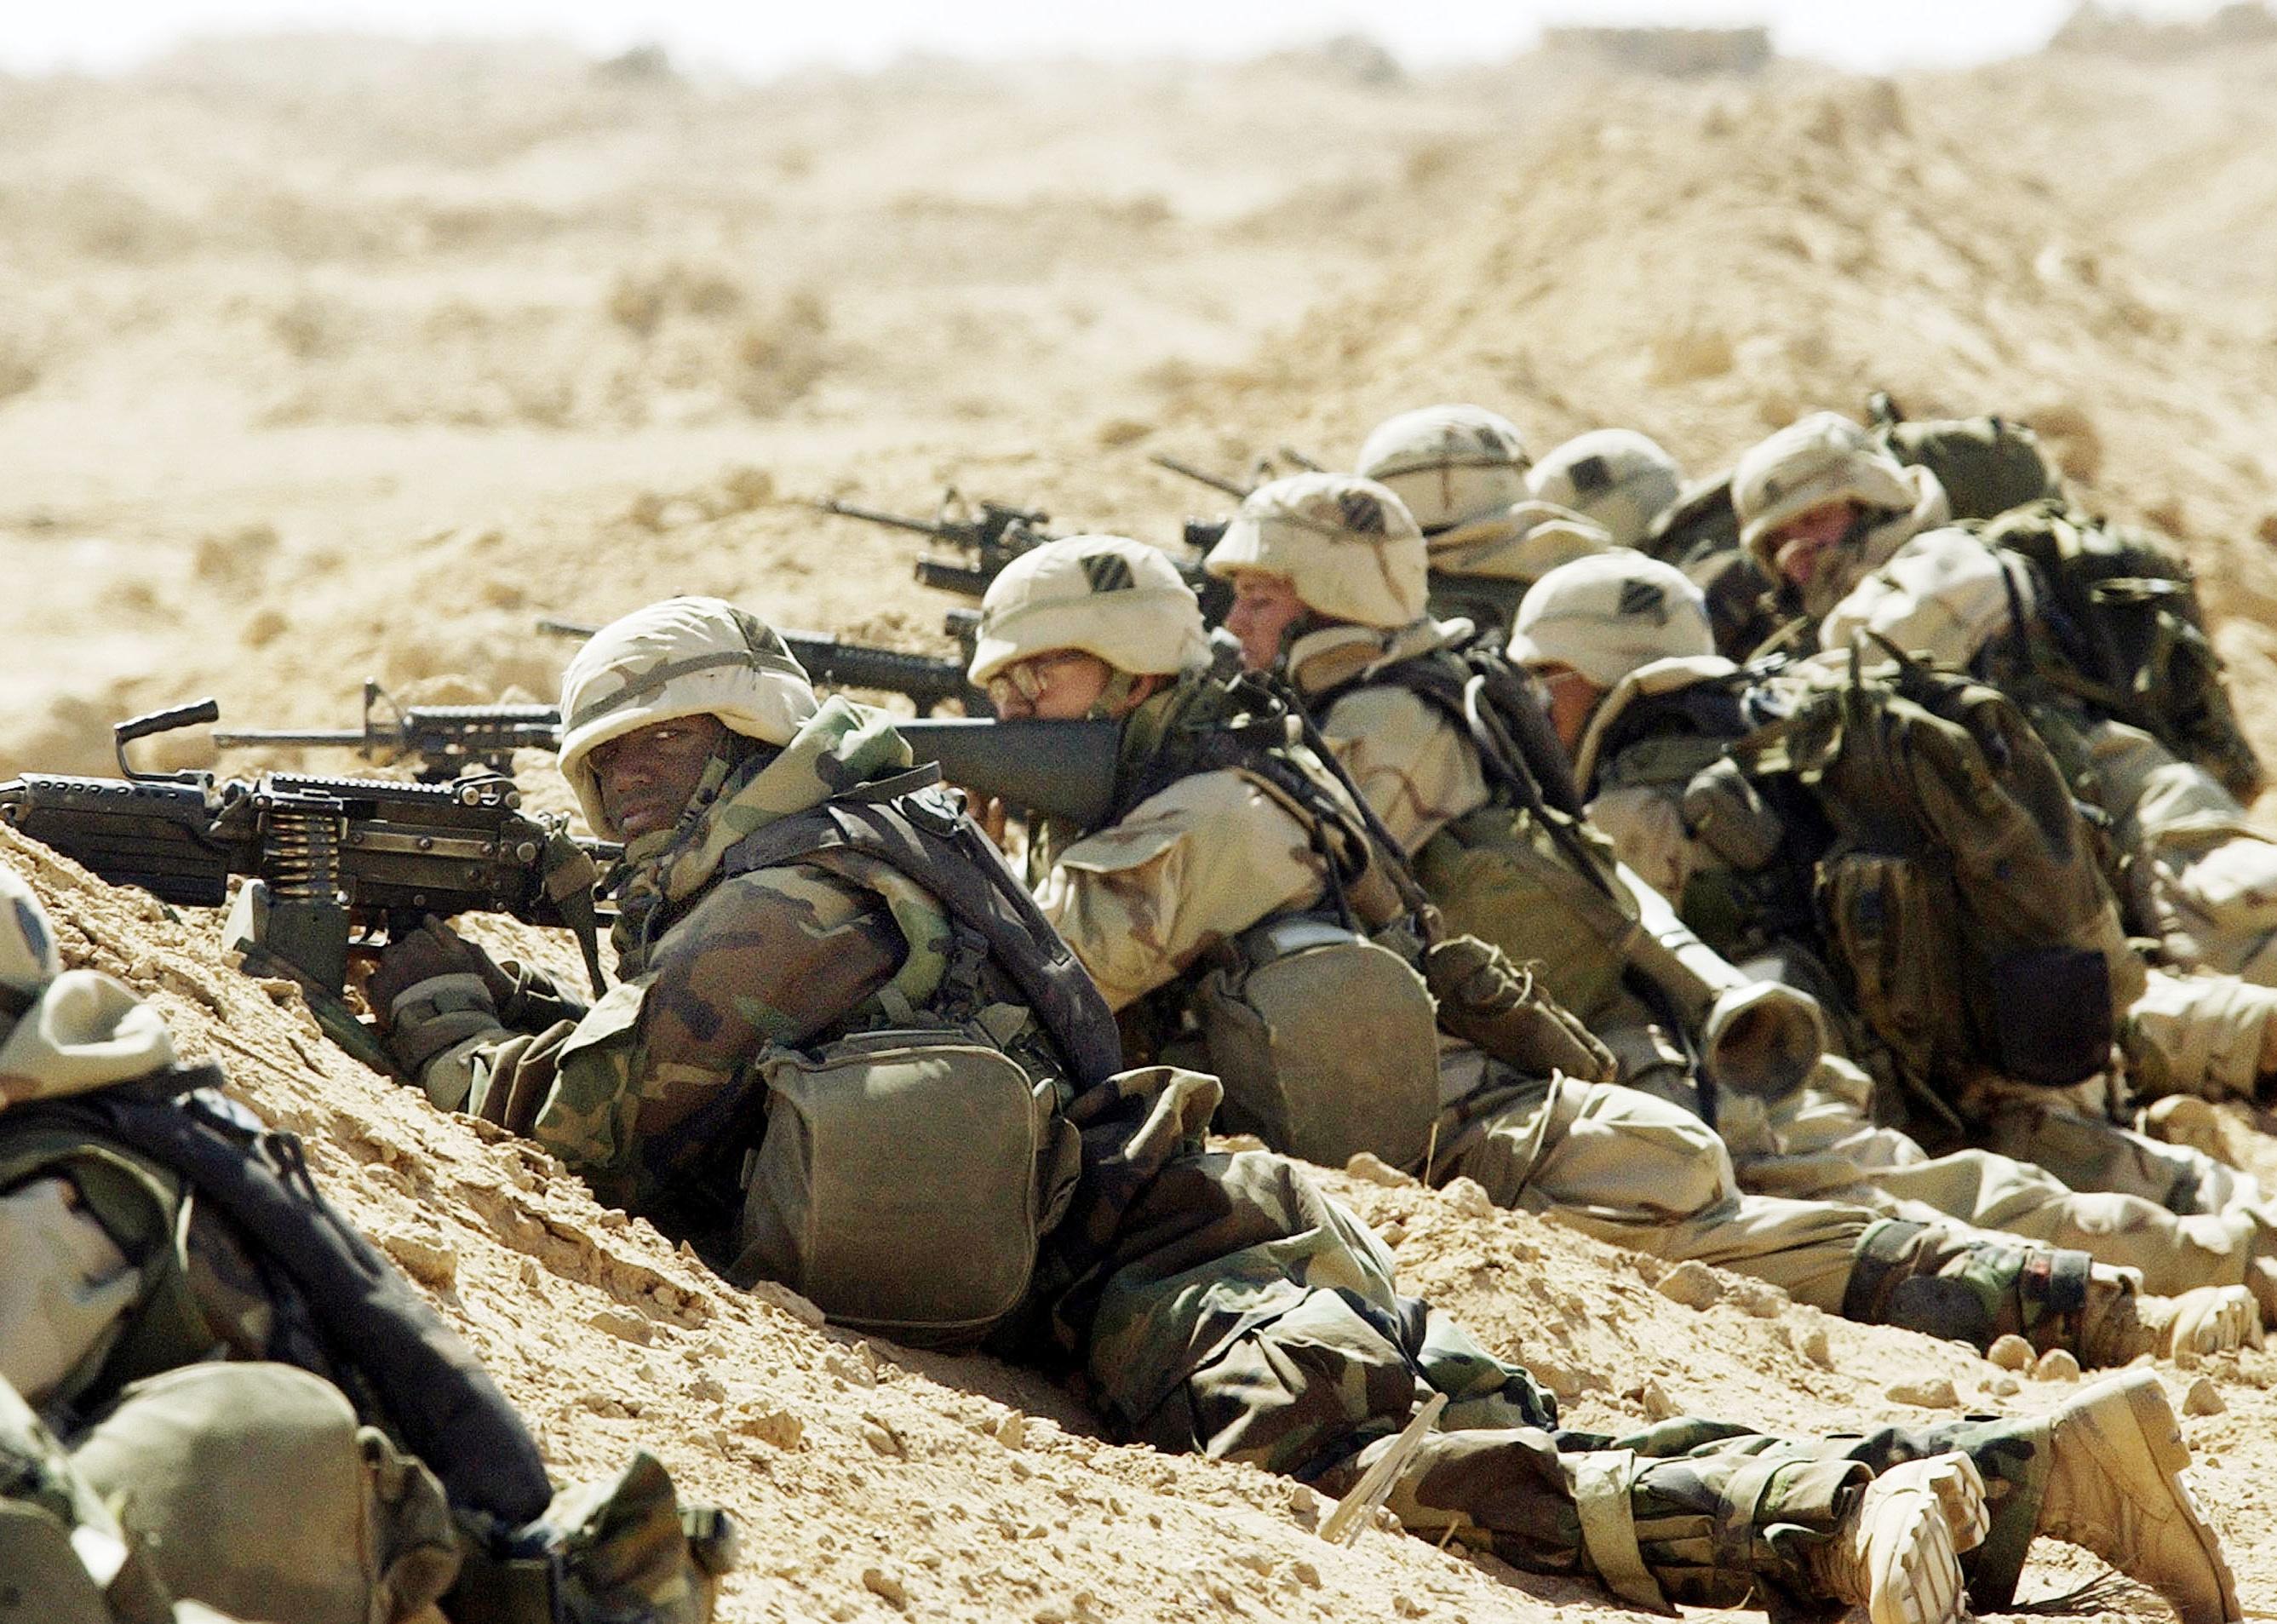 U.S. Army soldiers lined up on the ground in shooting position.